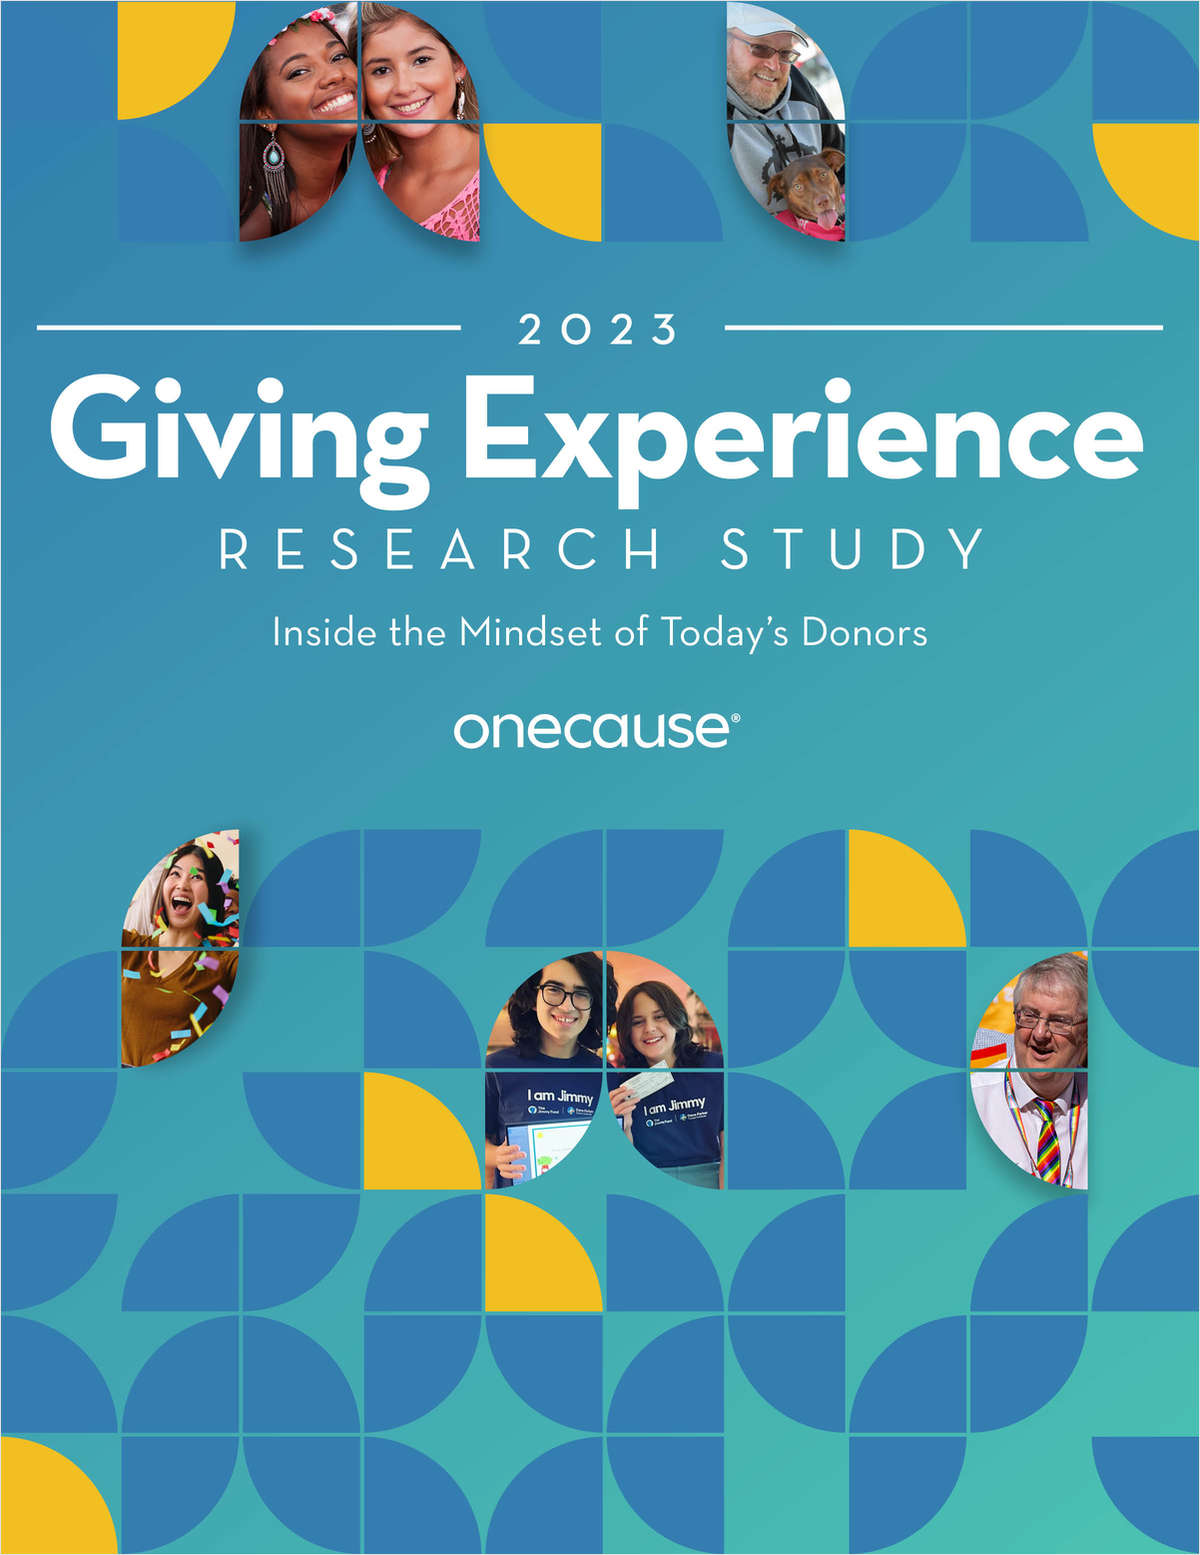 The Giving Experience Research Study